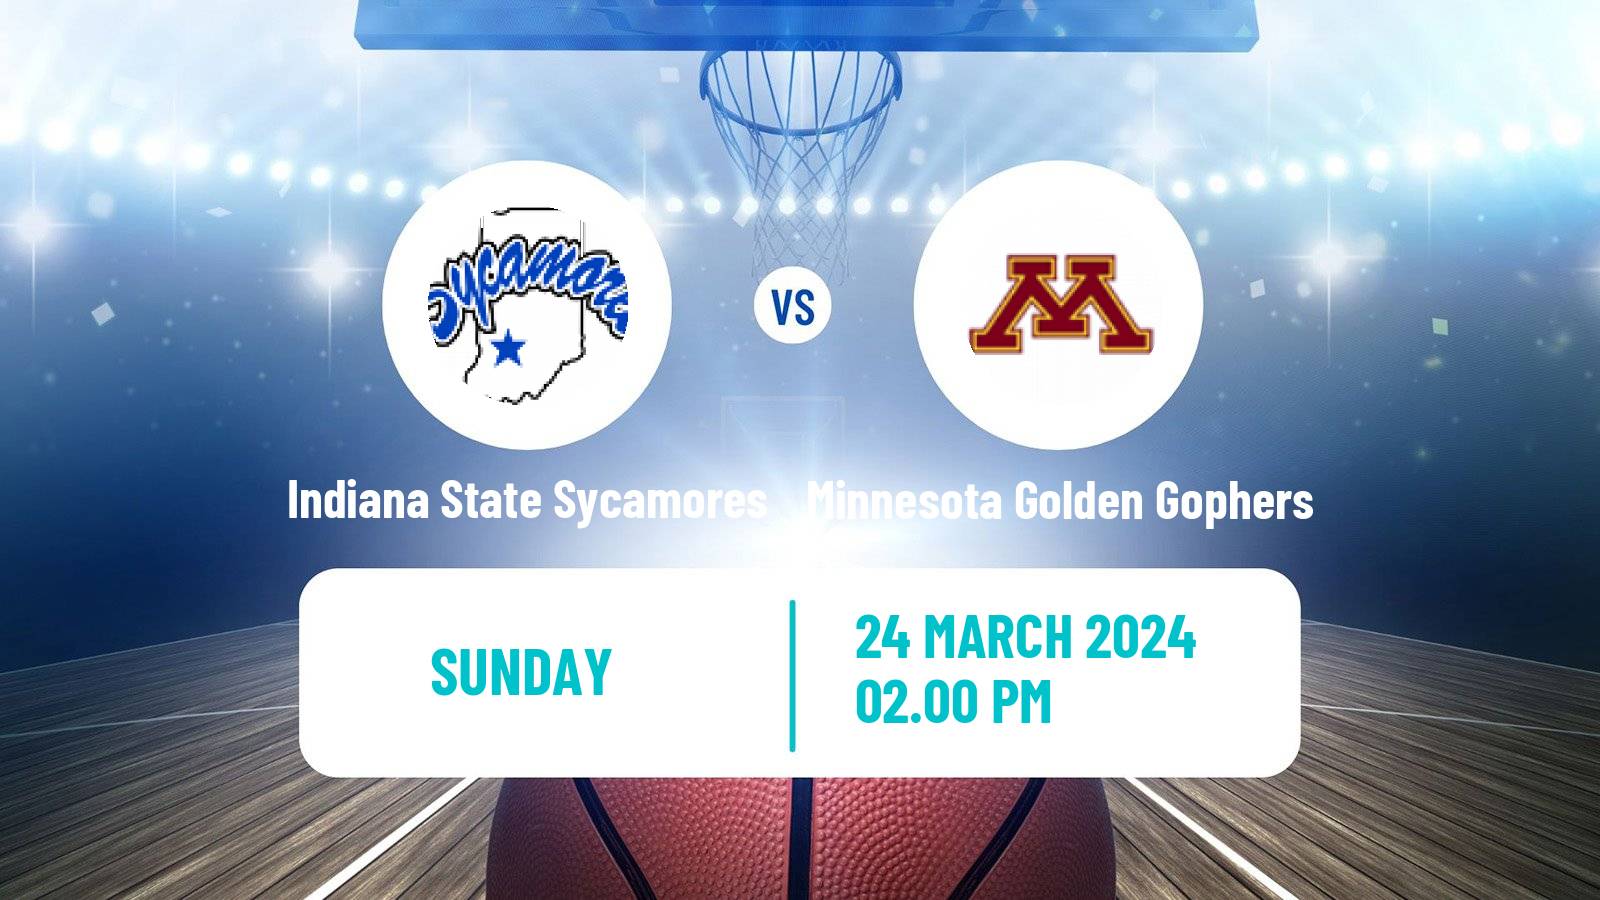 Basketball NIT Indiana State Sycamores - Minnesota Golden Gophers